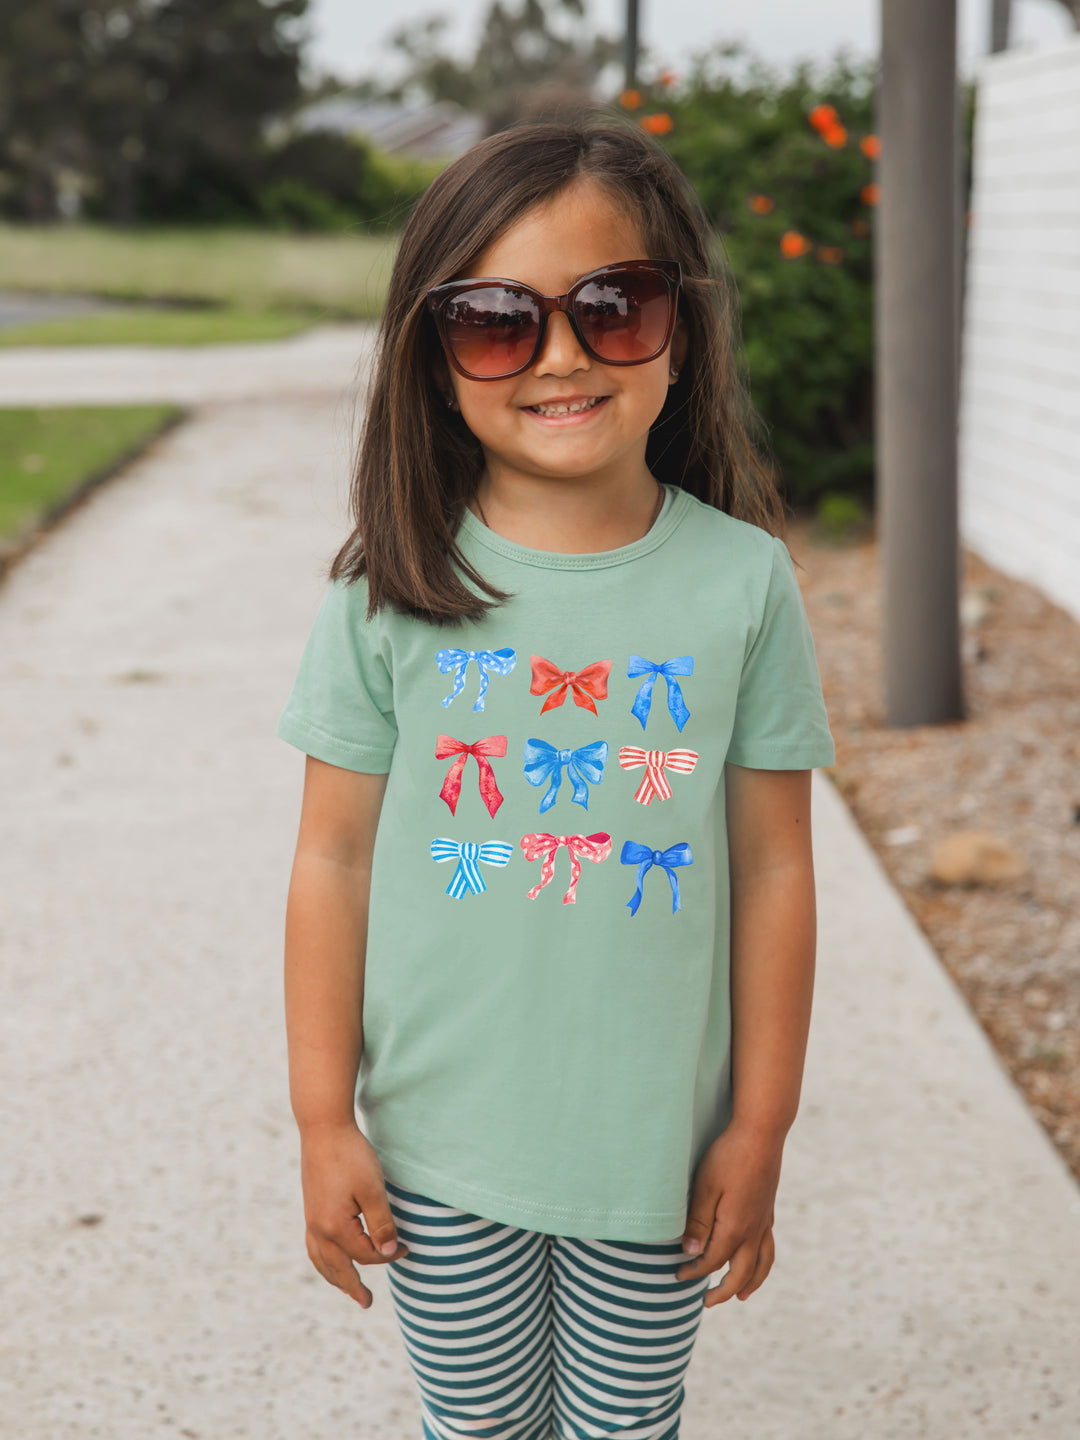 Red Blue Patriotic Bows Coquette Kids Graphic Tee